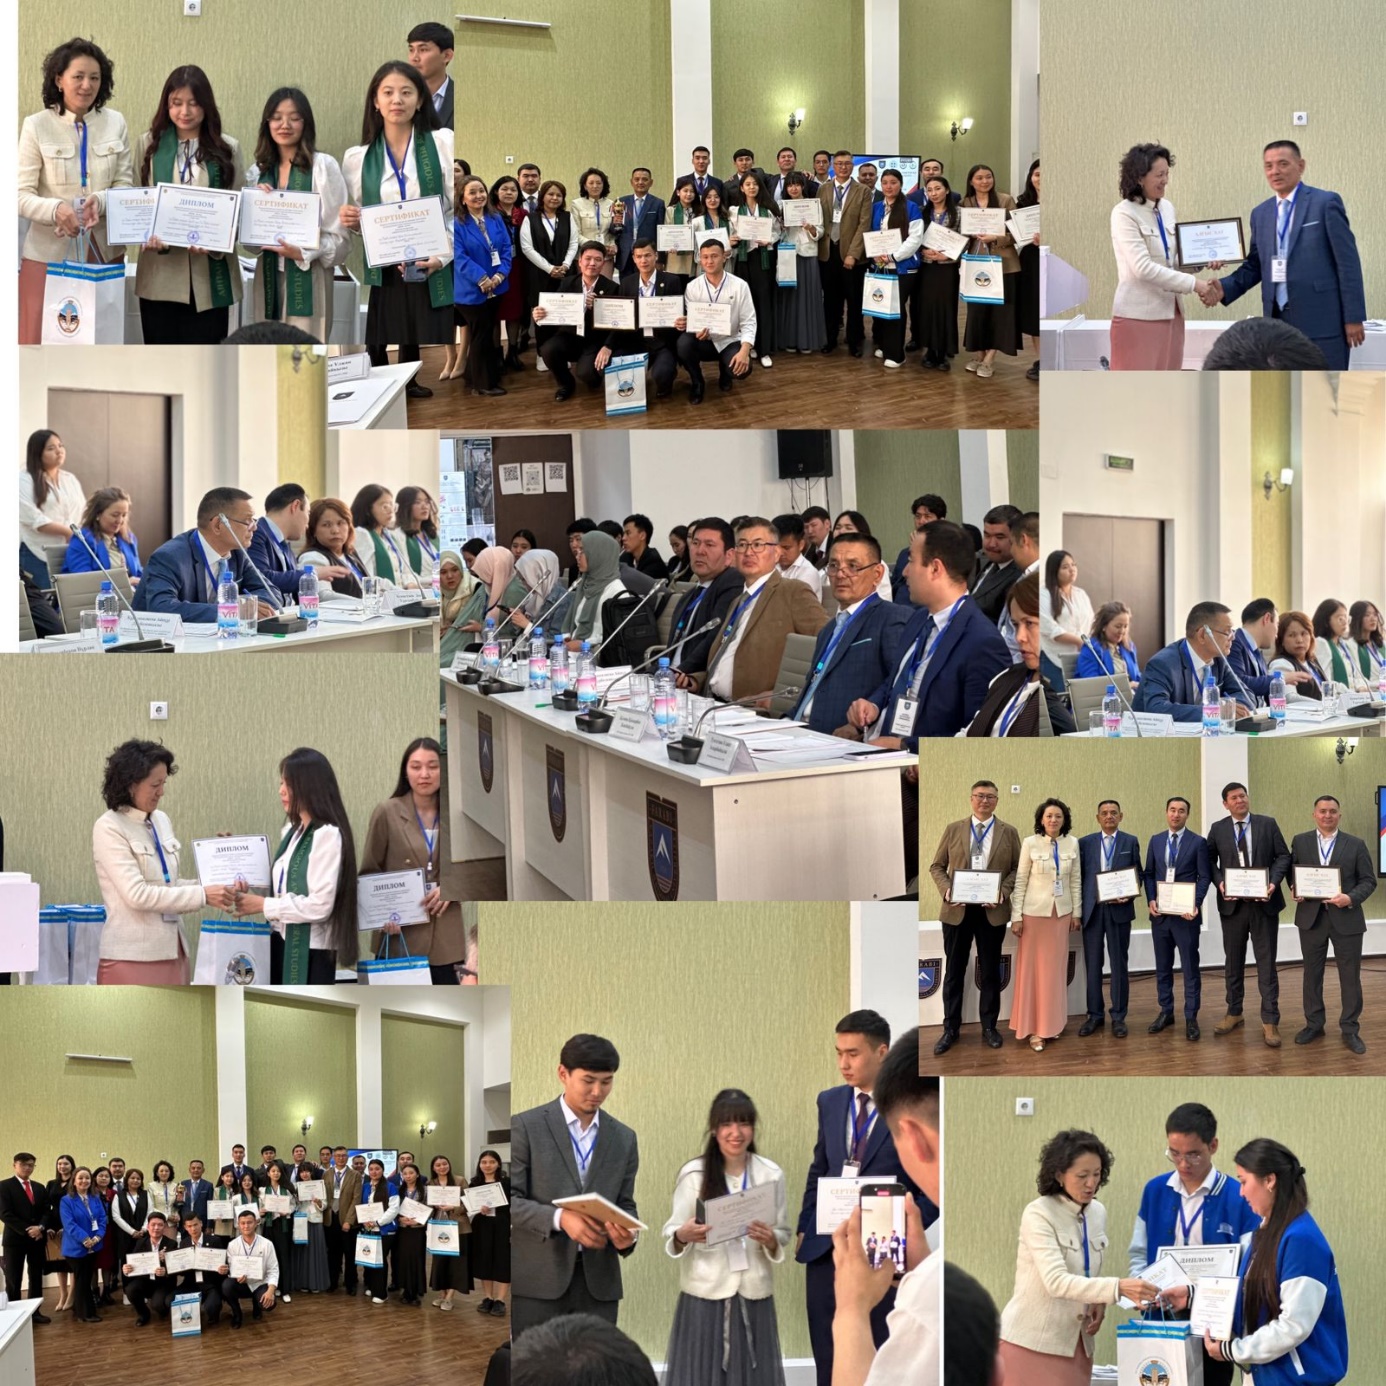 The XVI-th Republican subject Olympiad among students of higher educational institutions of the Republic of Kazakhstan on the educational program "Religious Studies"